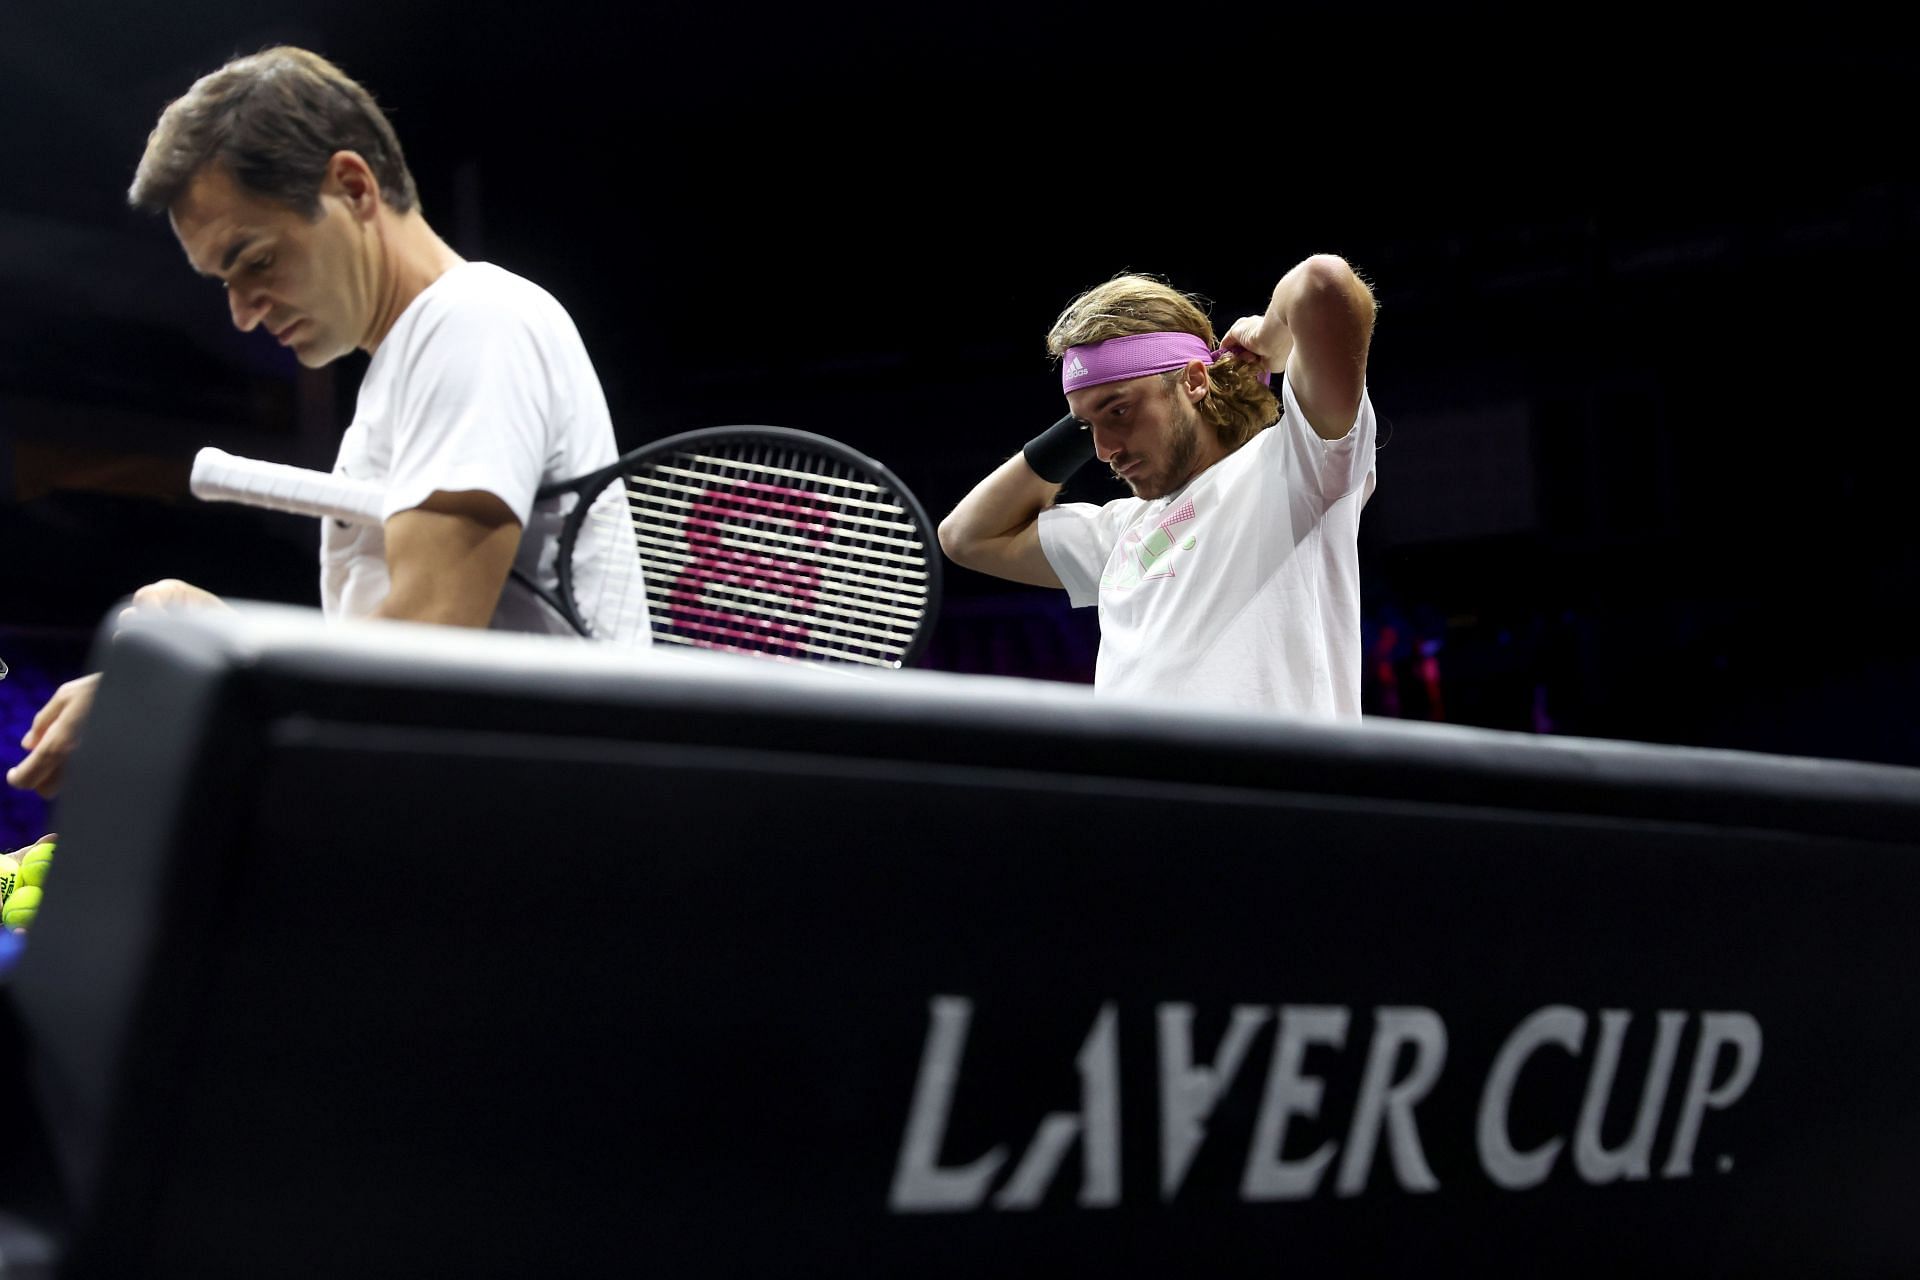 Stefanos Tsitsipas and Roger Federer at the 2022 Laver Cup.